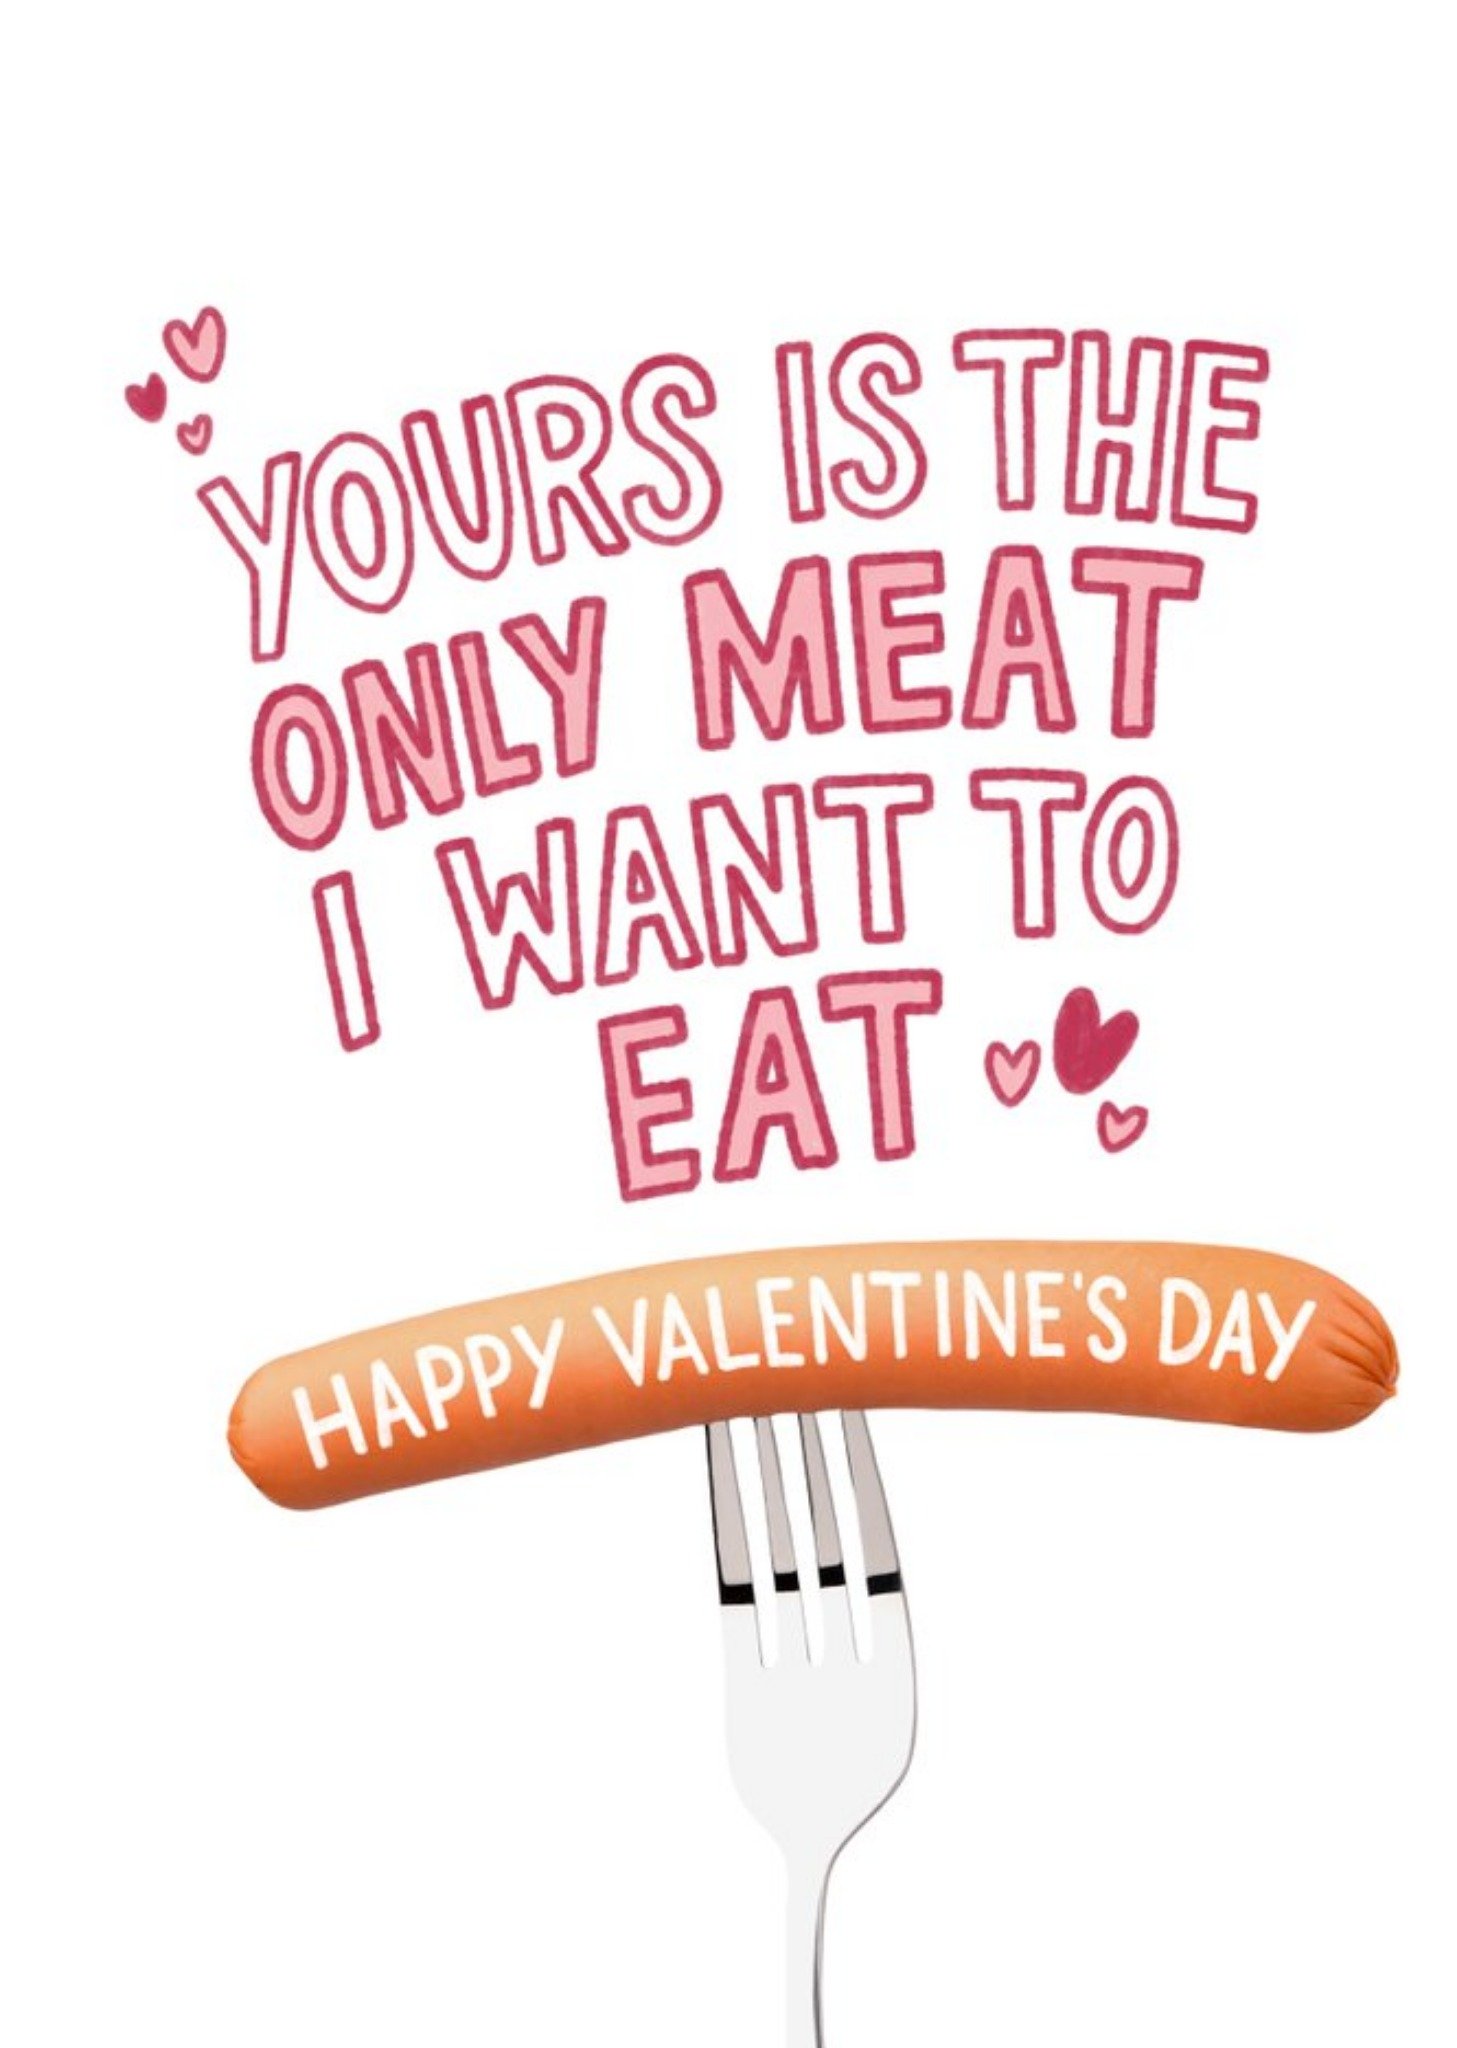 Moonpig Yours Is The Only Meat I Want To Eat Rude Valentines Day Card Ecard